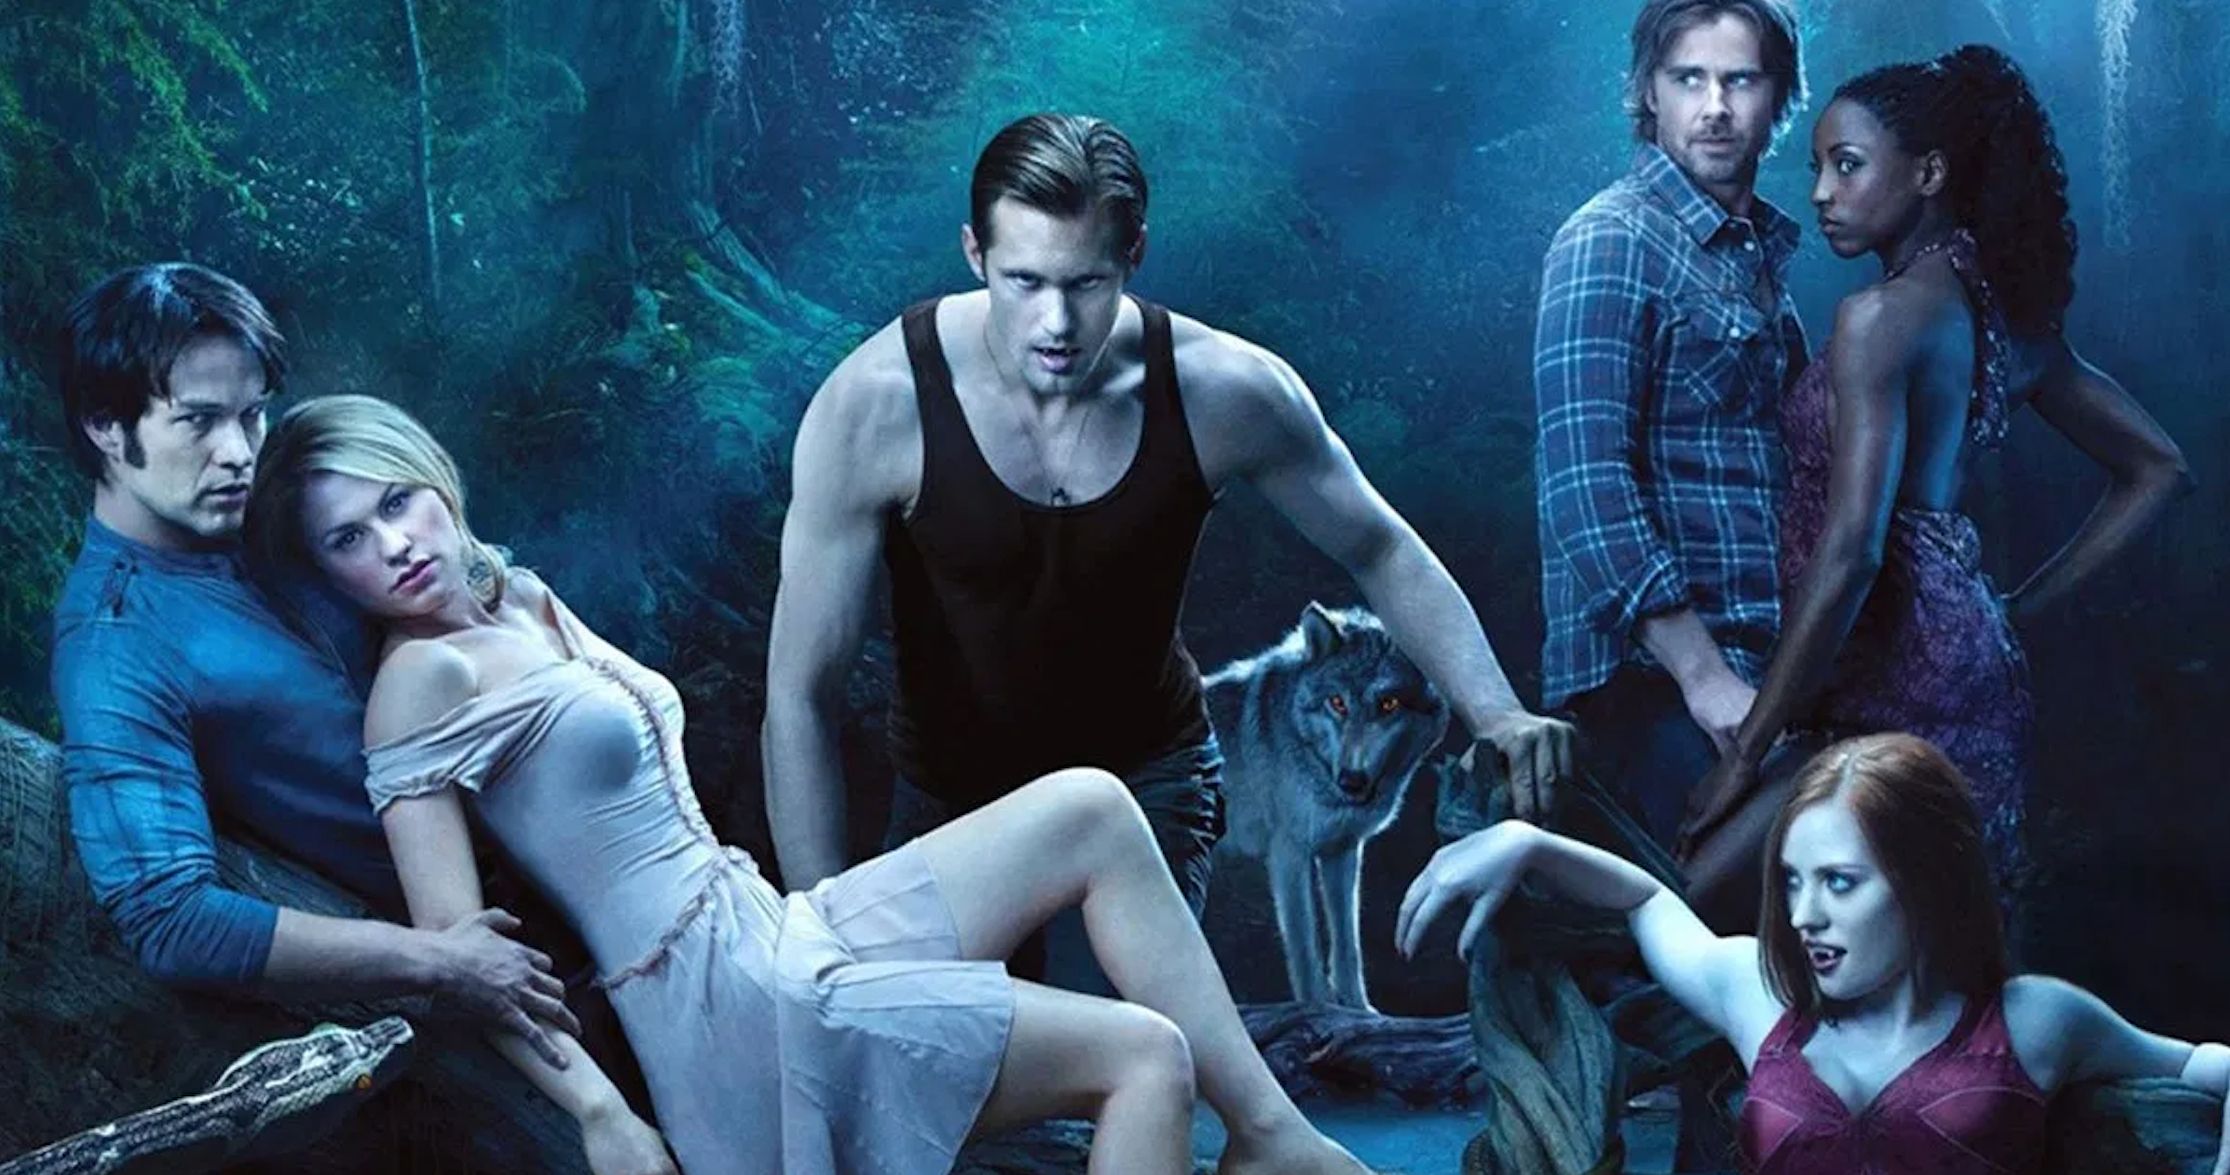 True Blood Reboot Will Only Happen If the Story Is Worth Telling Assures HBO Boss